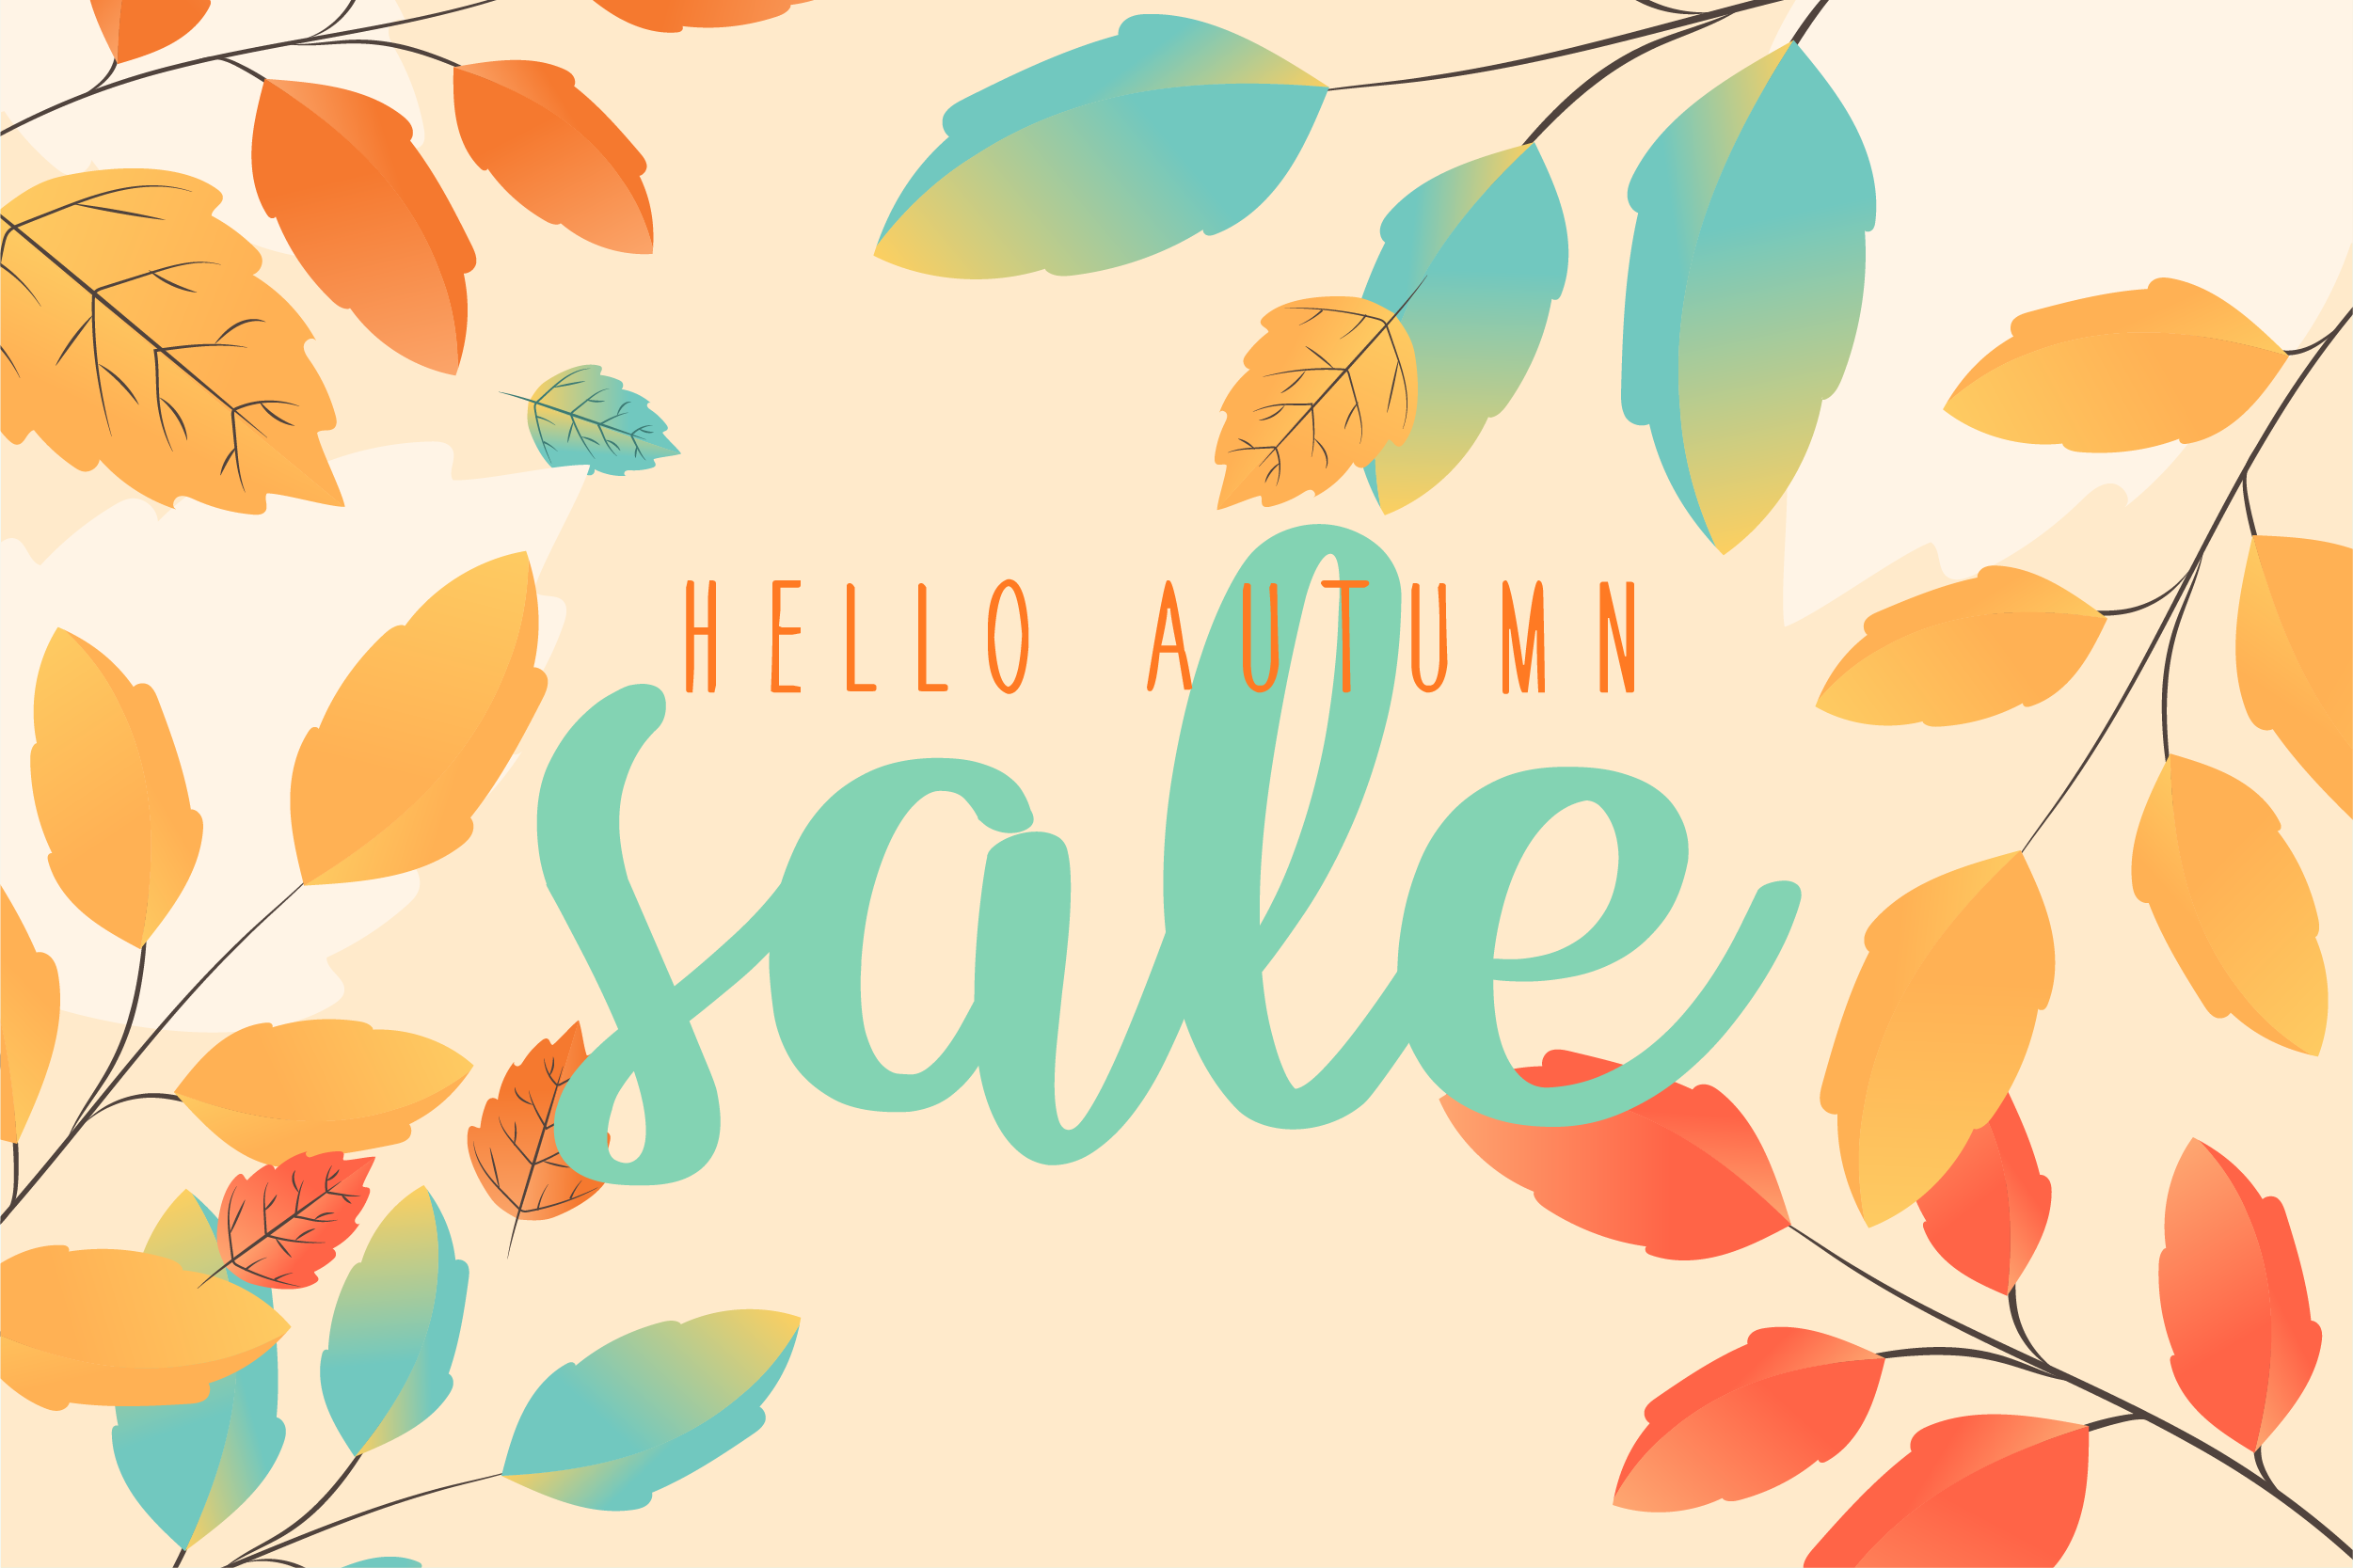 Our Hello Autumn Candle Sale is here